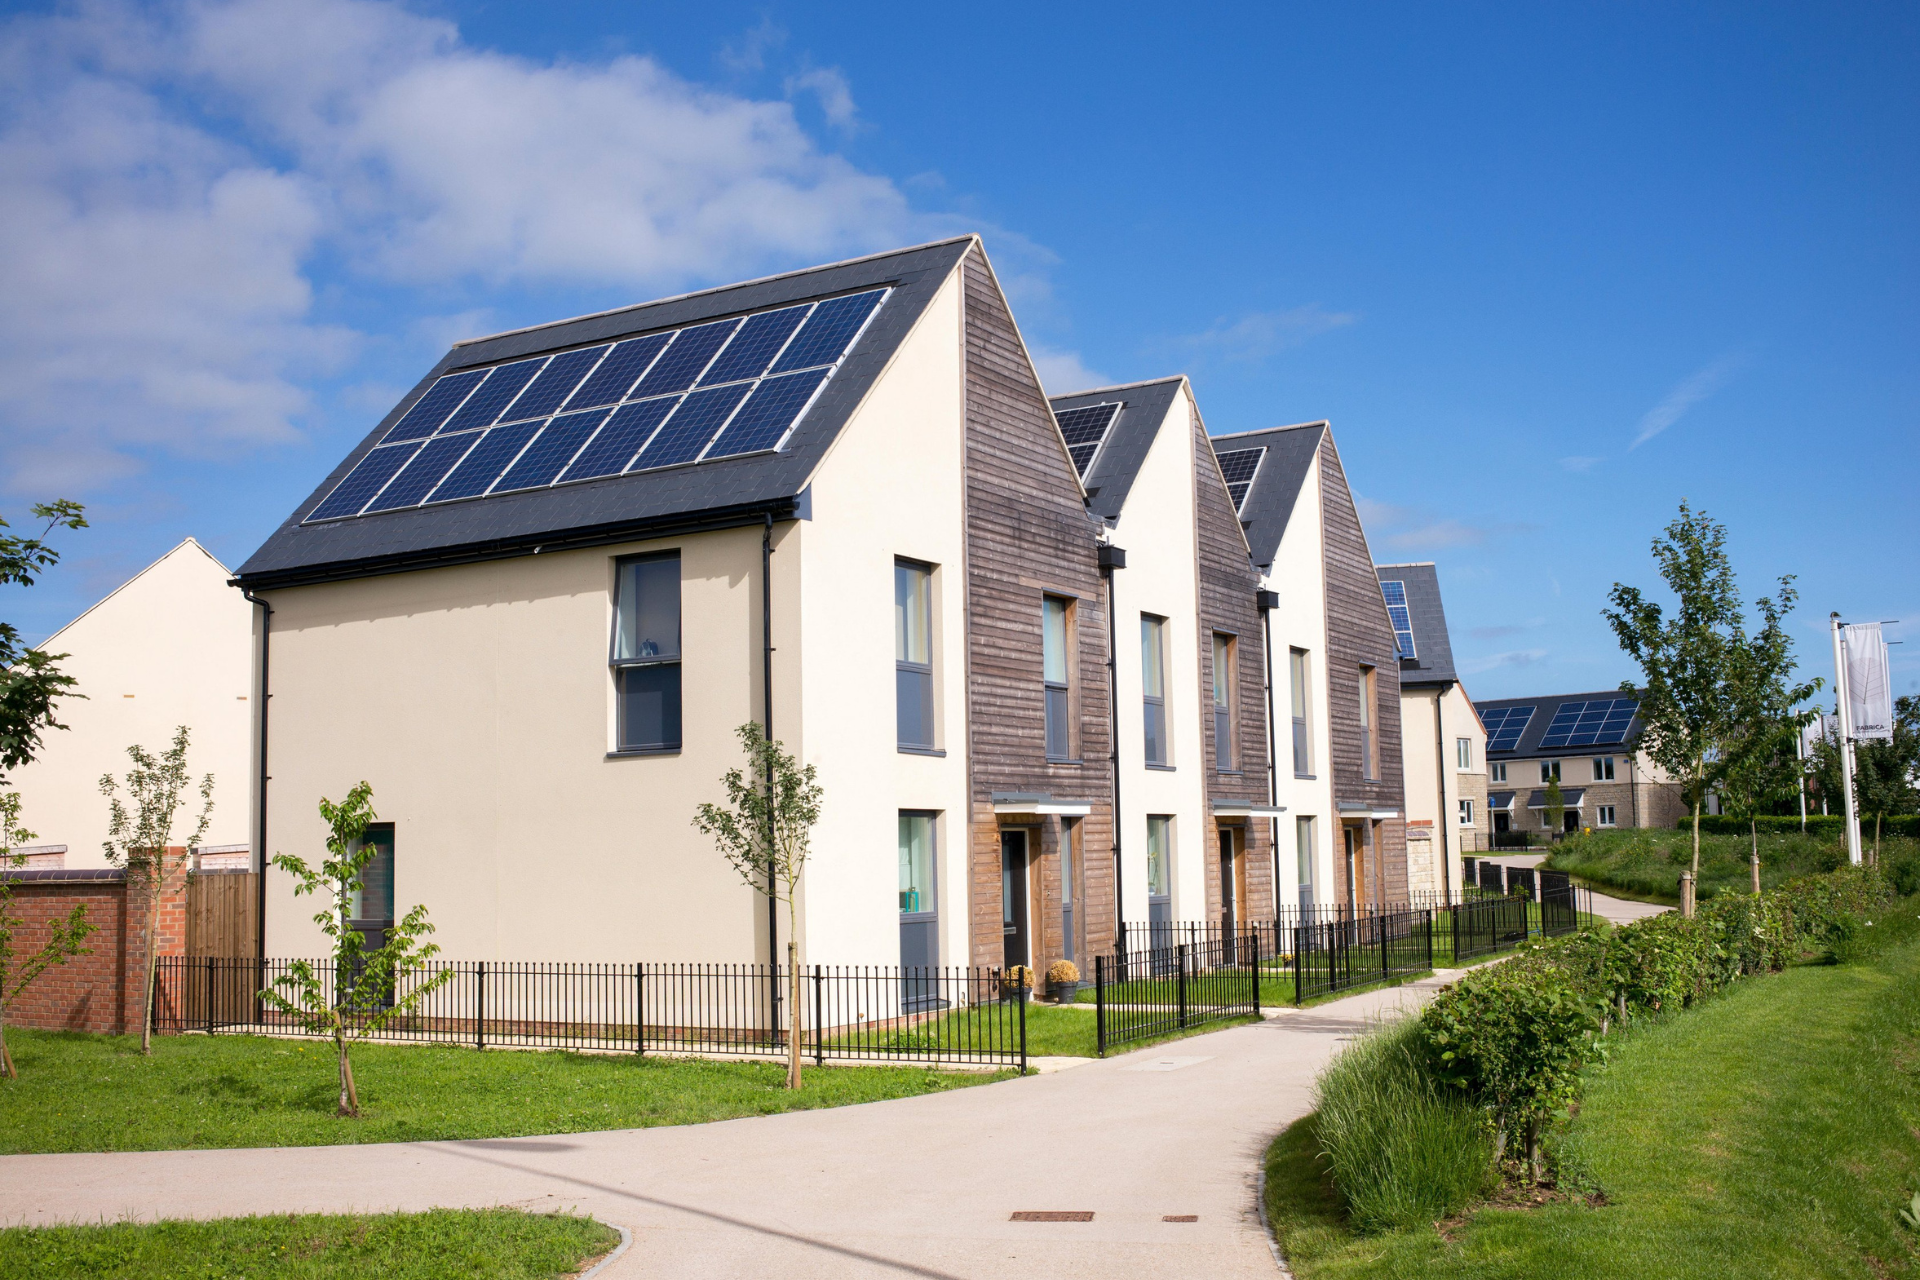 a photo of the new build houses in bicester's new eco town